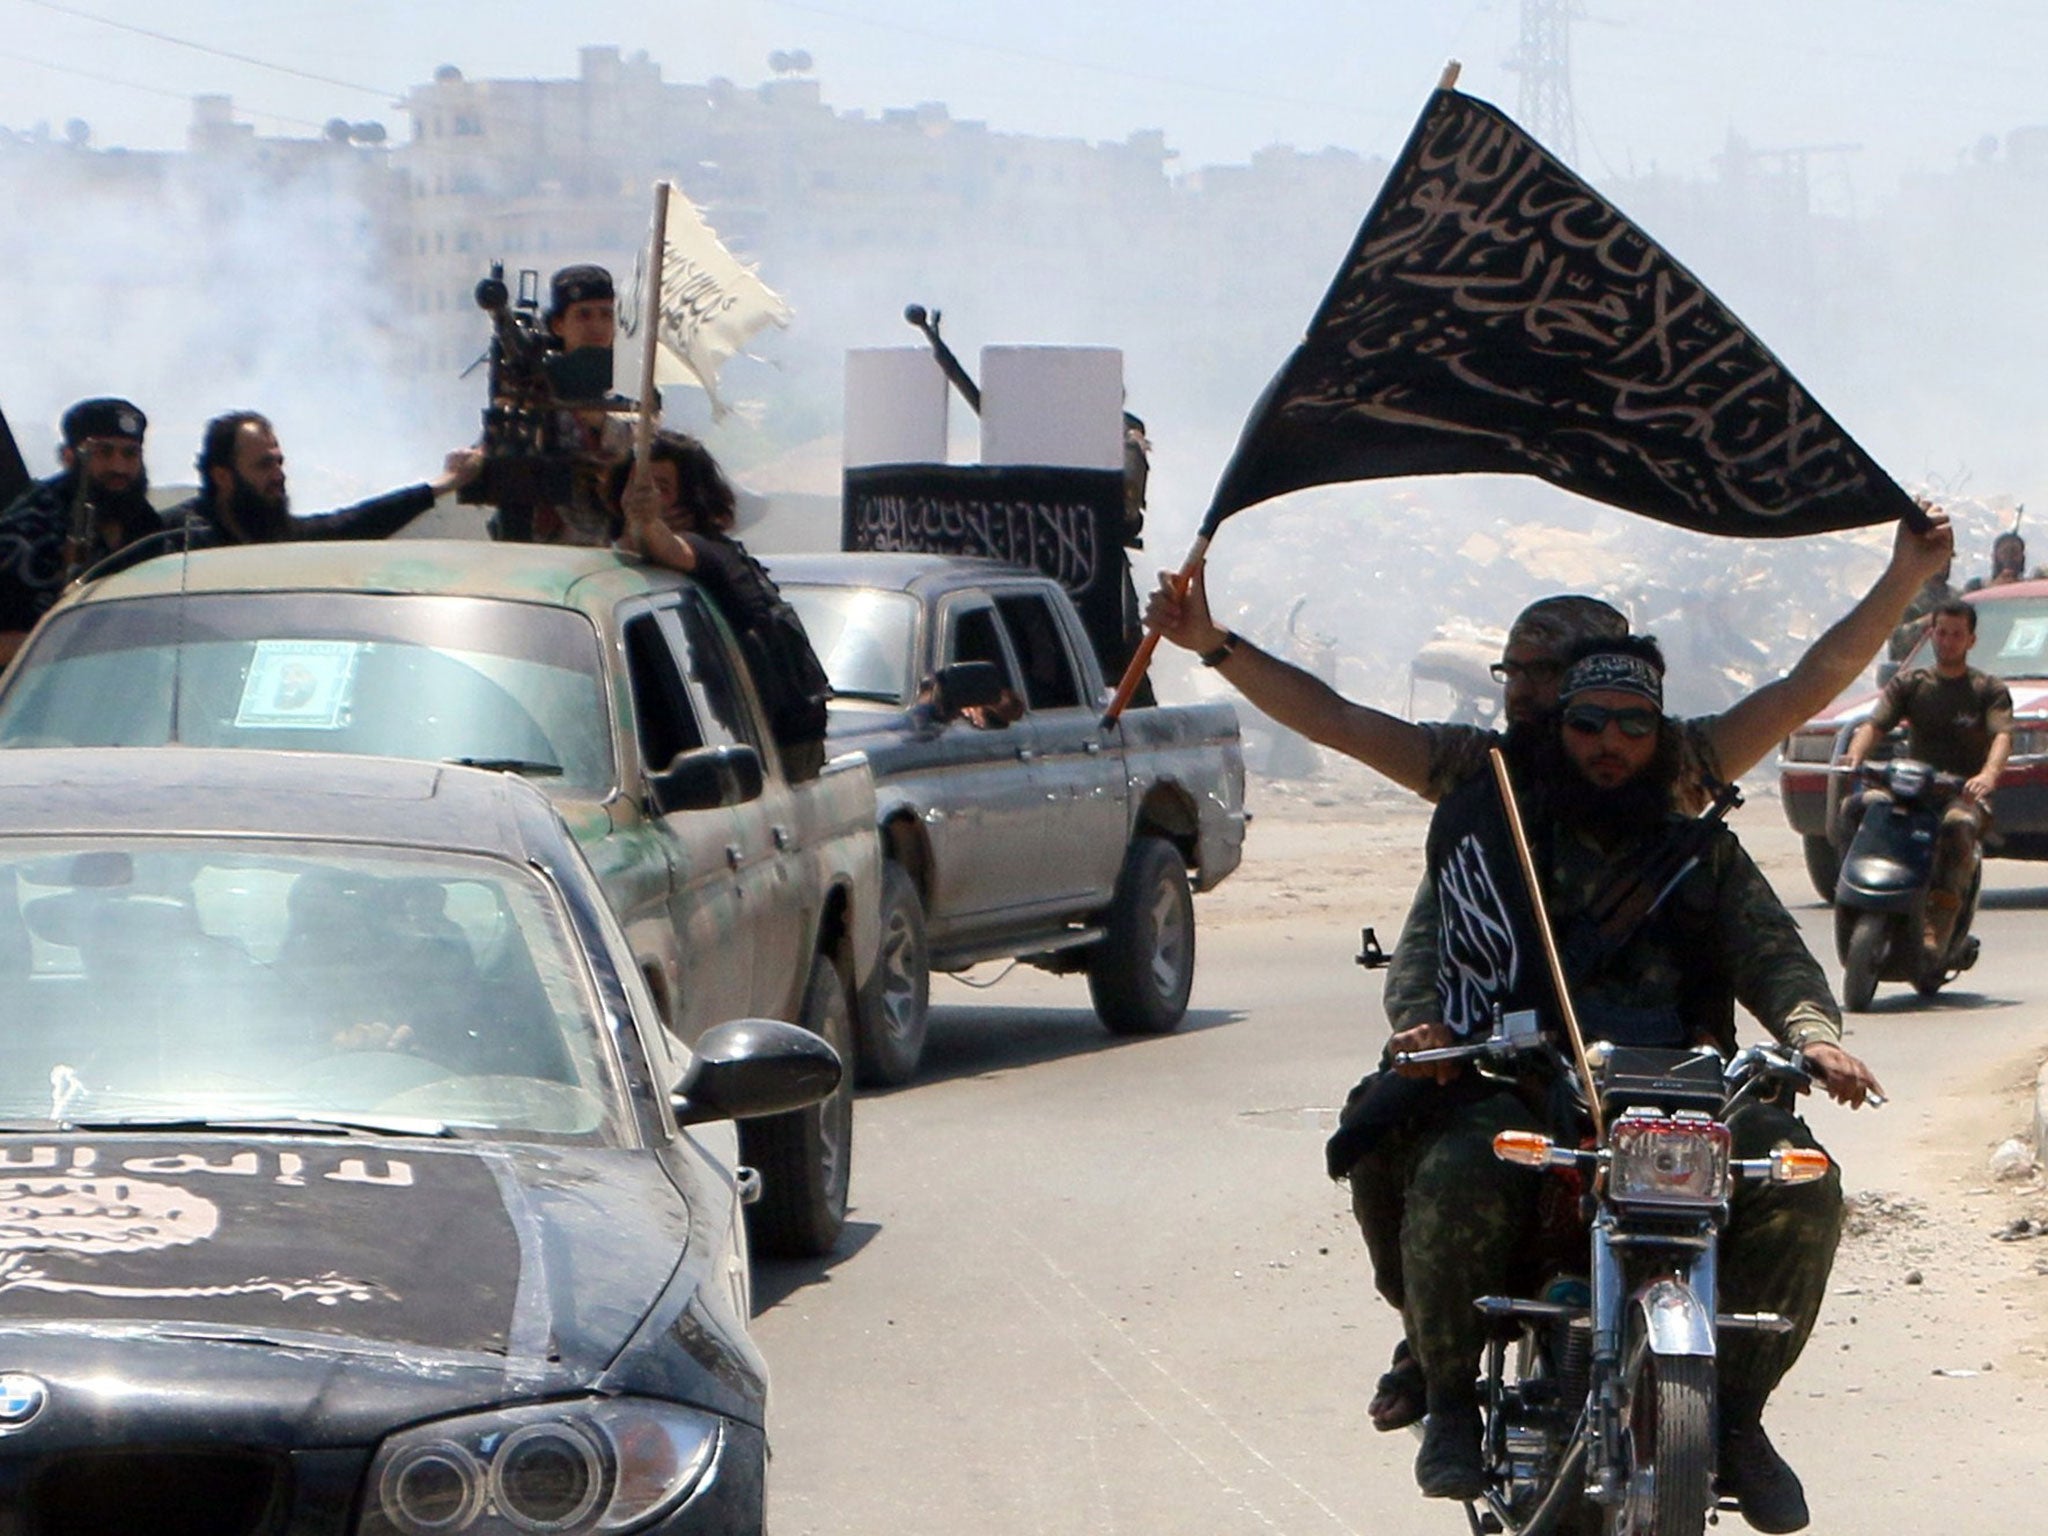 Fighters from Al-Qaeda's Syrian affiliate Al-Nusra Front drive in the northern Syrian city of Aleppo flying Islamist flags as they head to a frontline